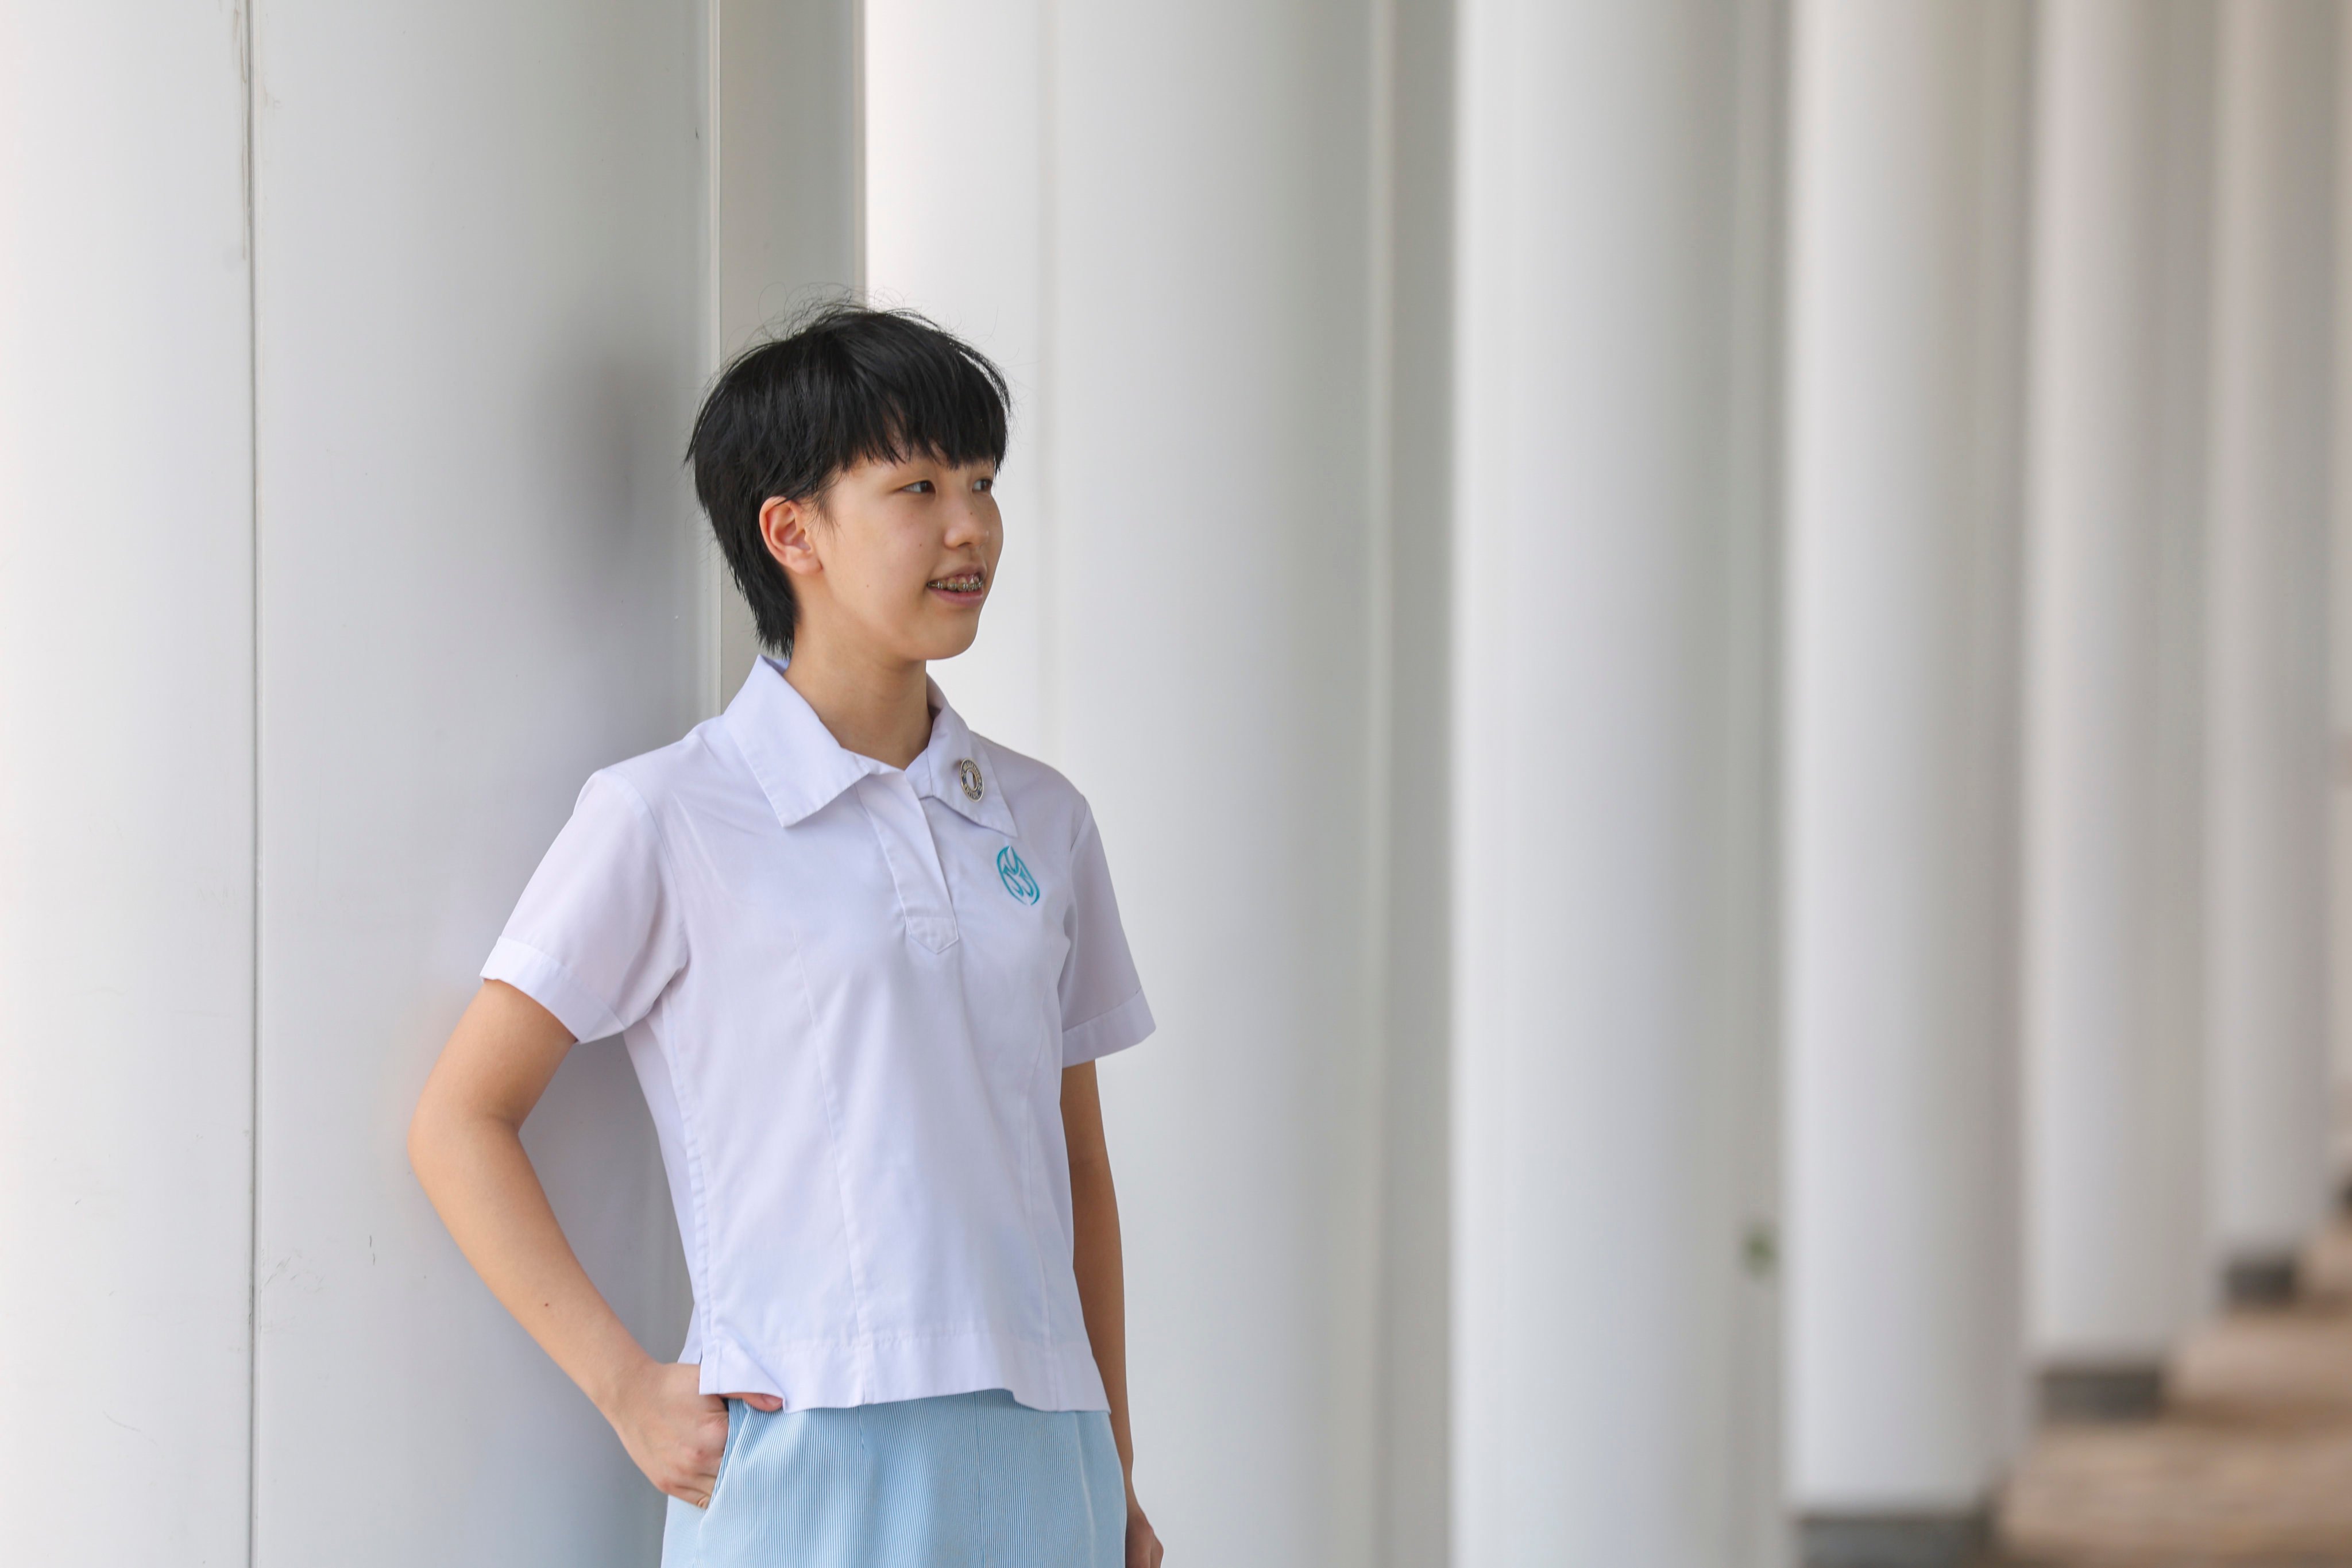 Amber Wong is a Form Six student at Marymount Secondary School. Photo: Edmond So